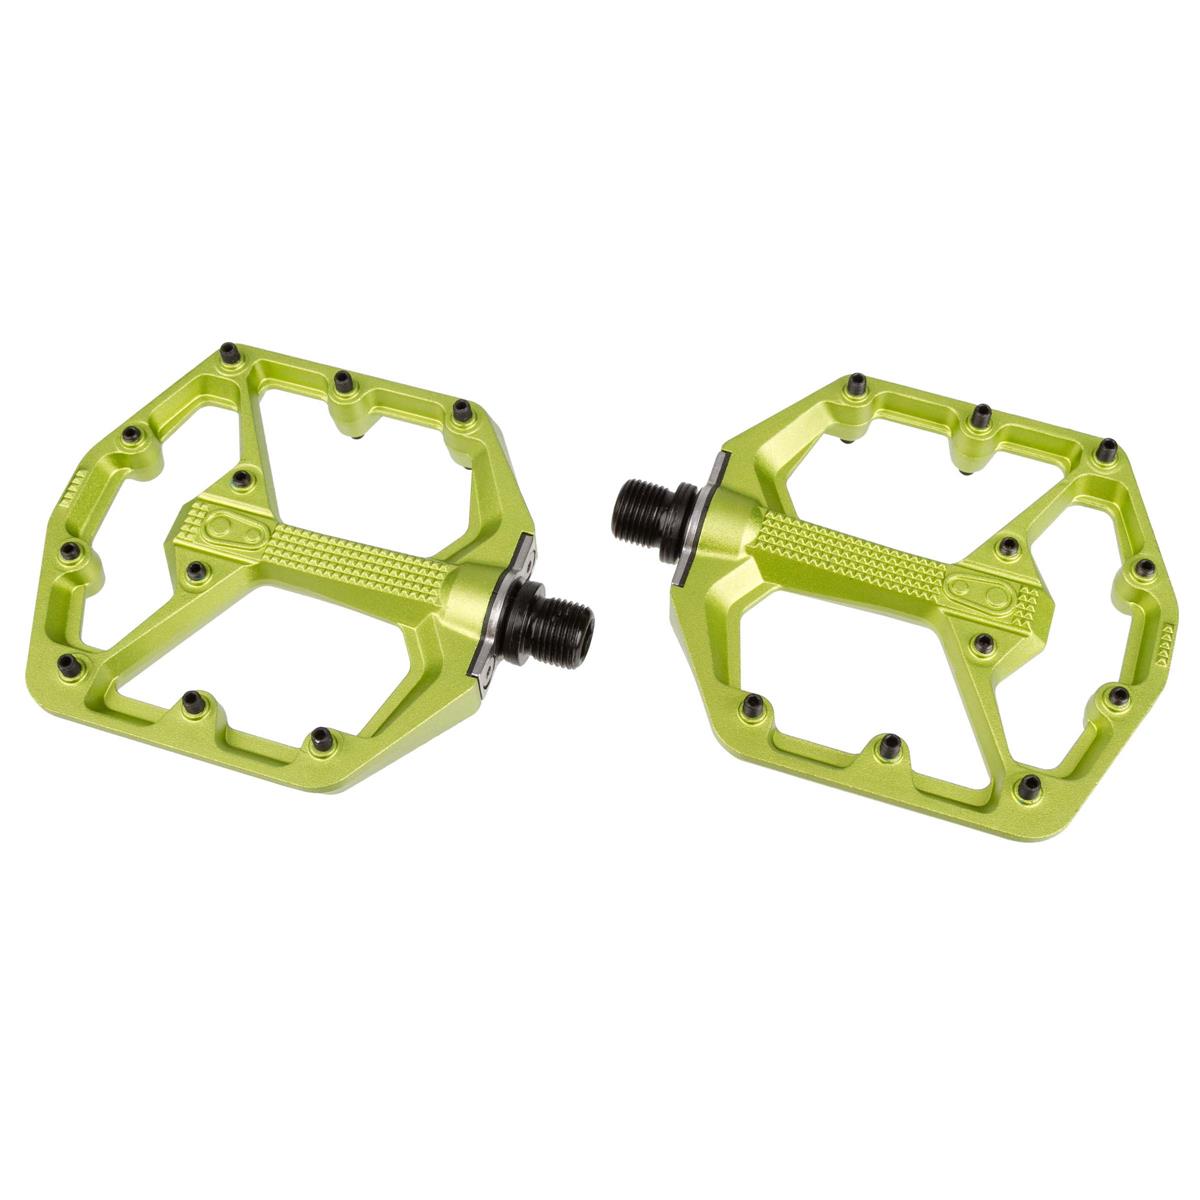 Crankbrothers Pedals Stamp 7 Limited Edition, Green, Small